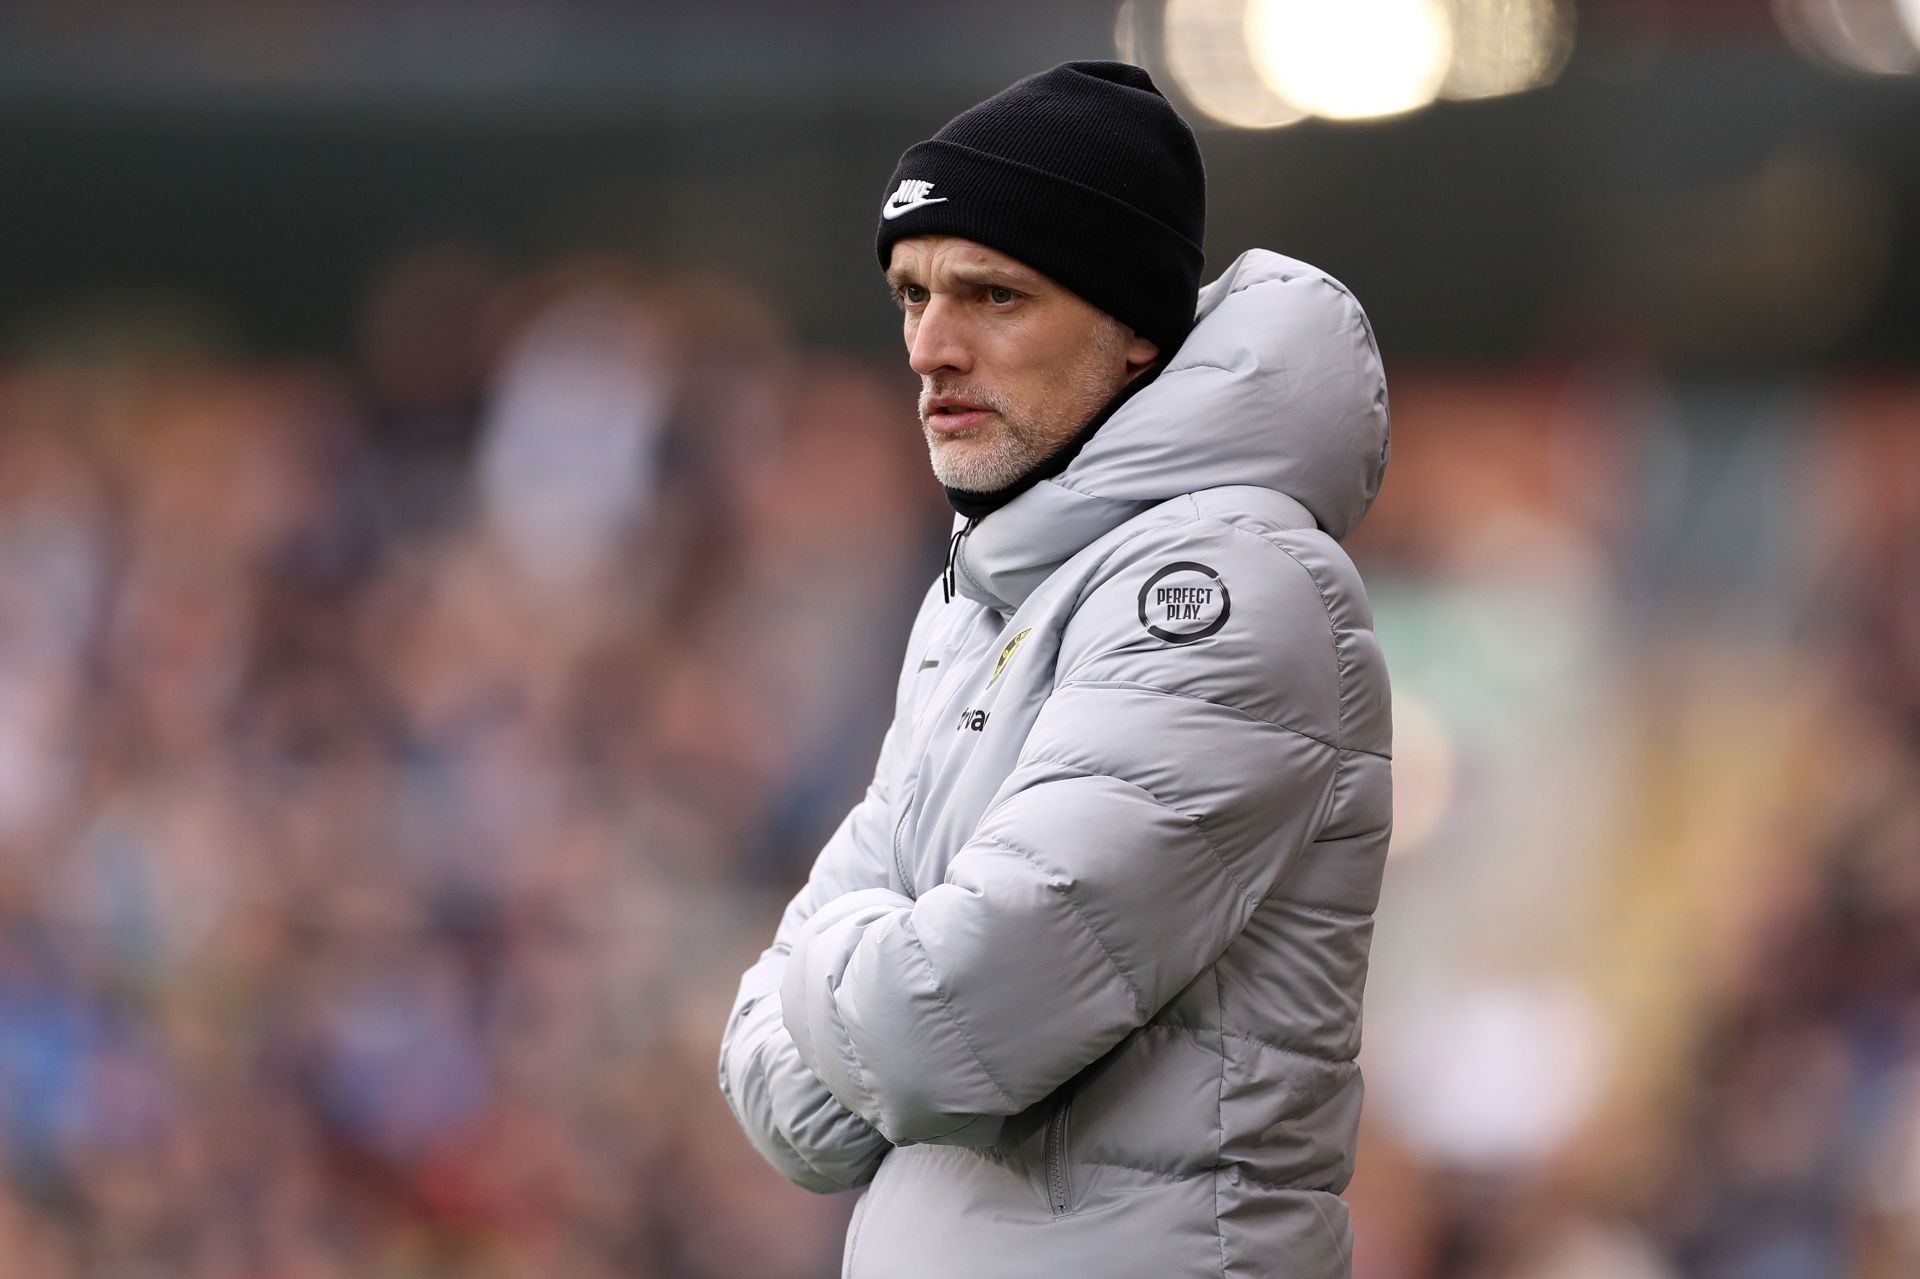 Chelsea manager Thomas Tuchel is eager for more silverware.